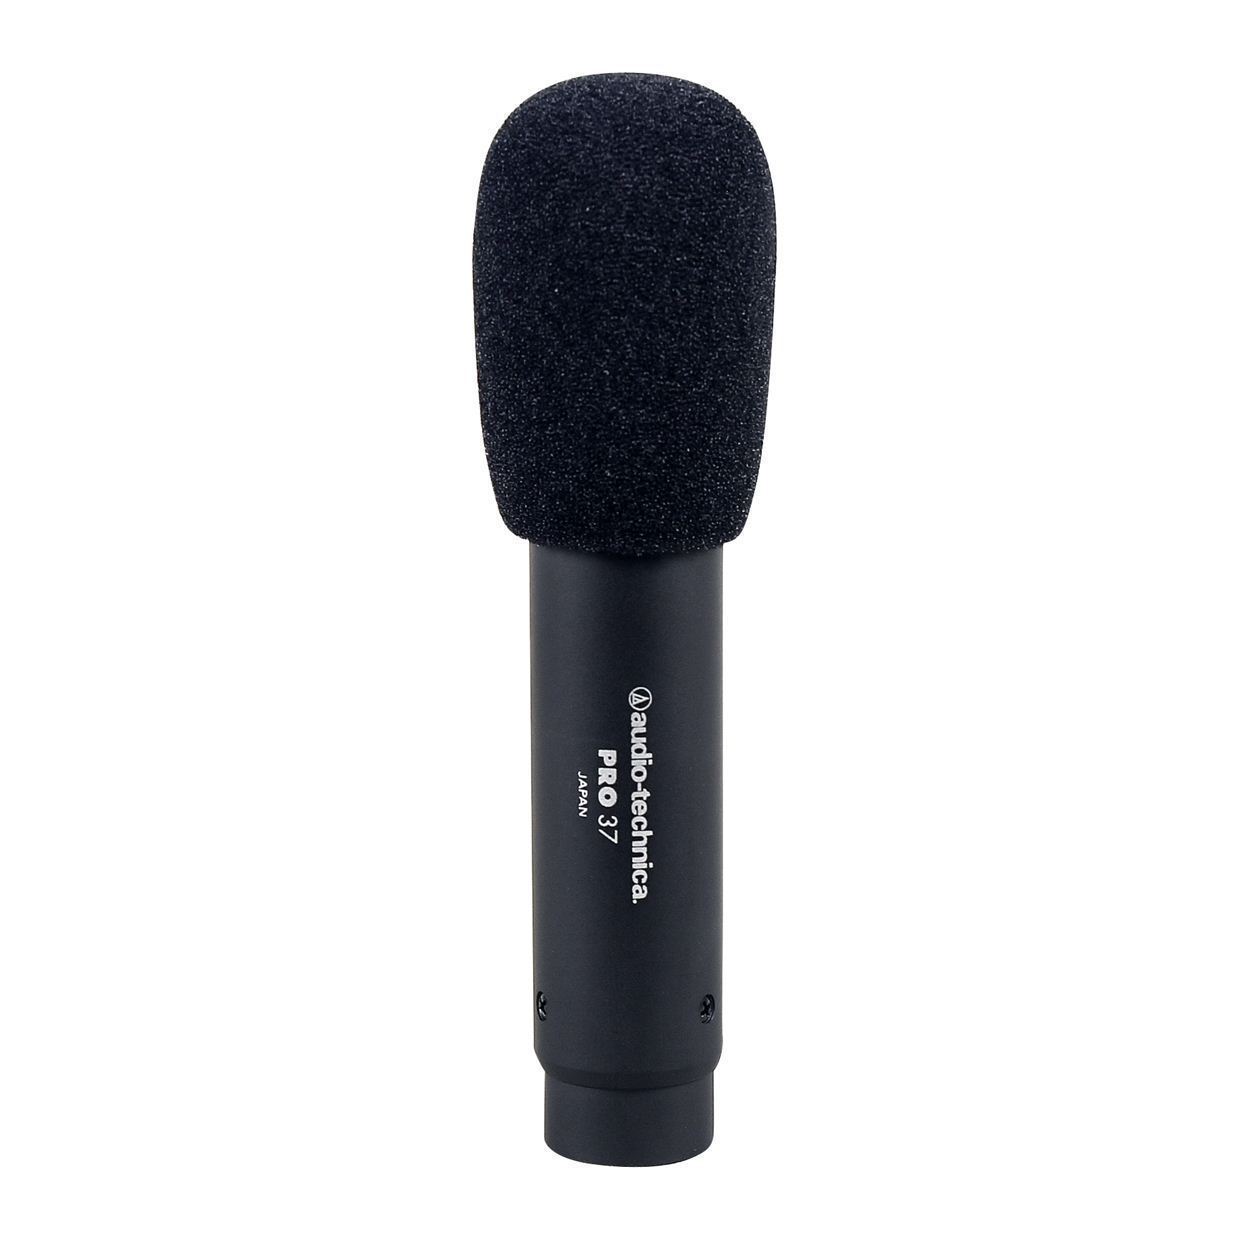 Audio Technica PRO37 Diaphragm Condenser Microphone PRO 37+Mic Stand+Iso Shield - image 4 of 6